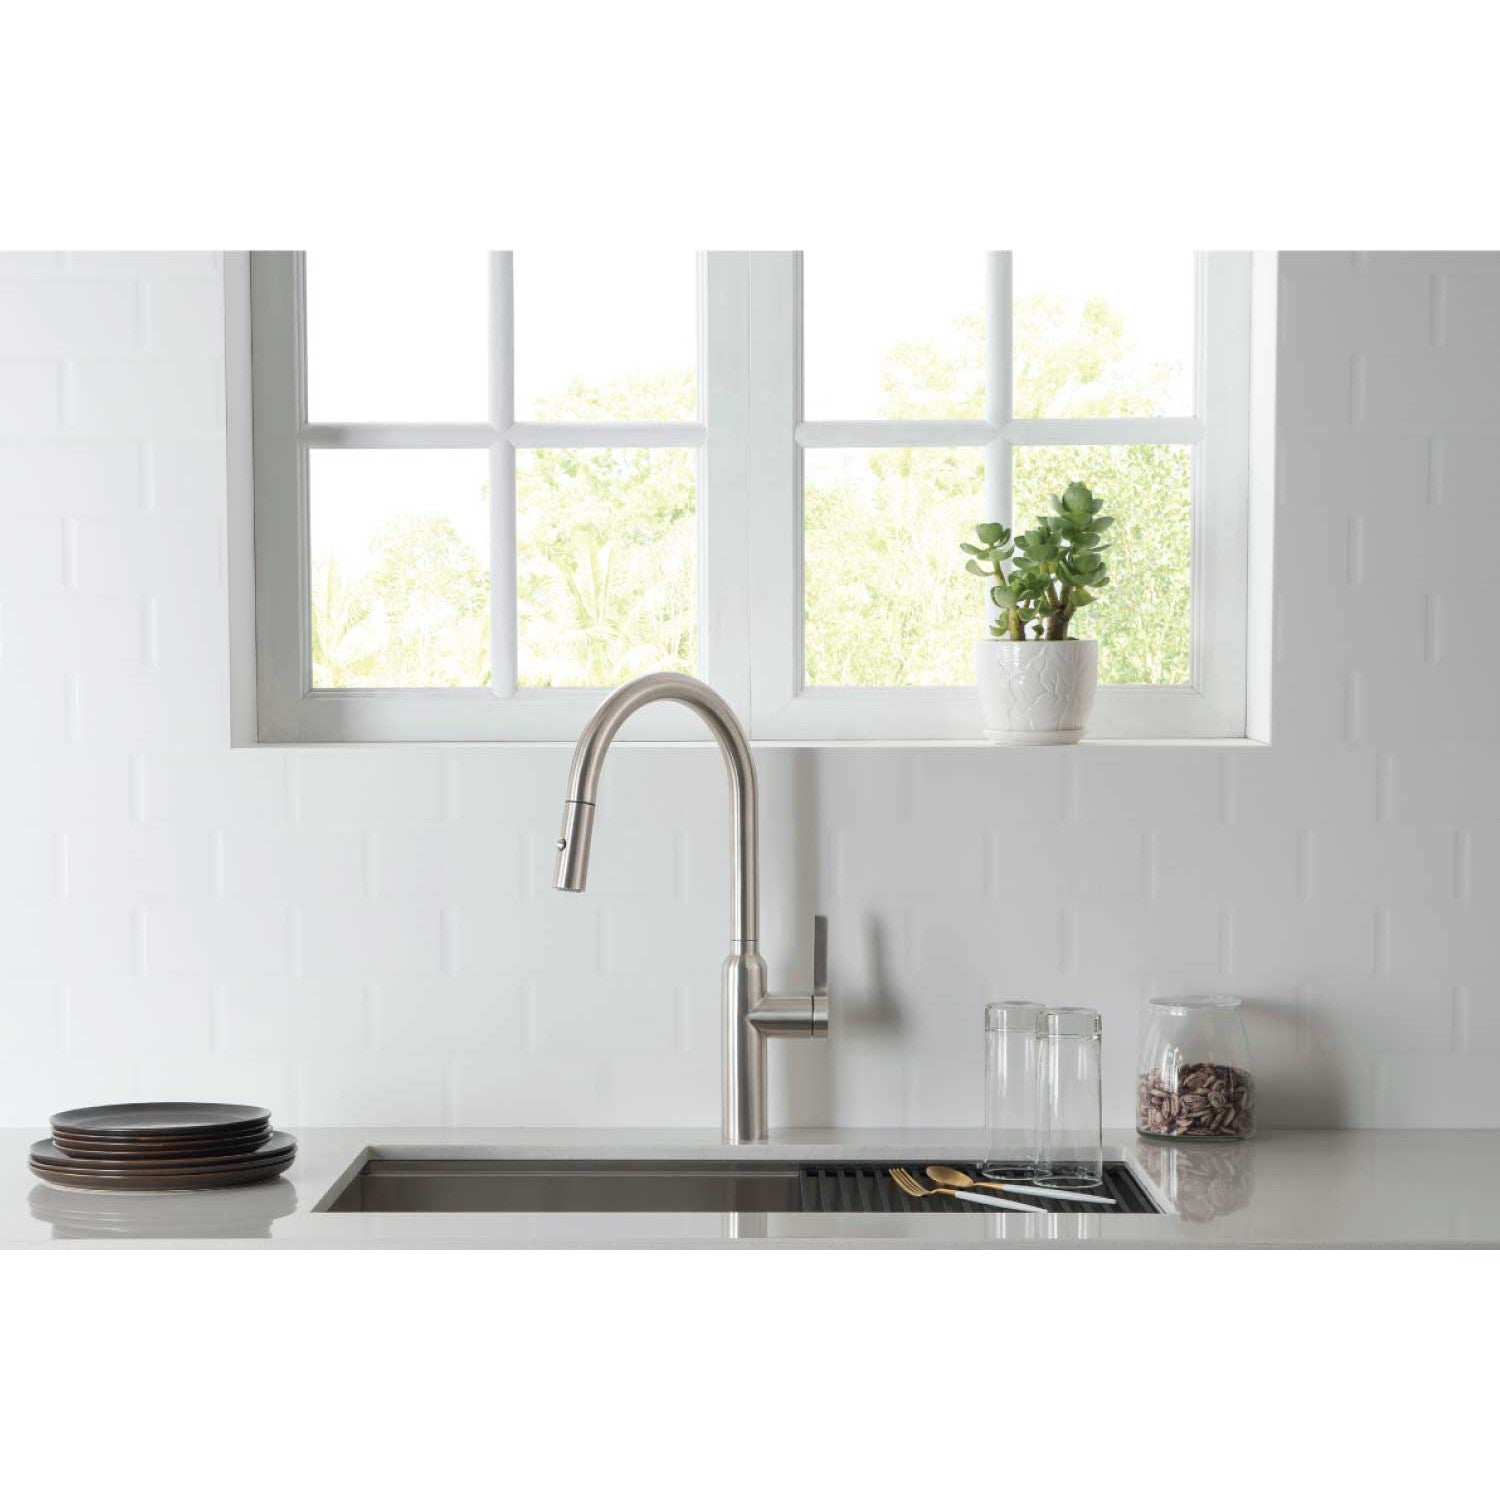 Isenberg Klassiker Ziel 17" Single Hole Deep Red Stainless Steel Pull-Down Kitchen Faucet With Dual Function Sprayer